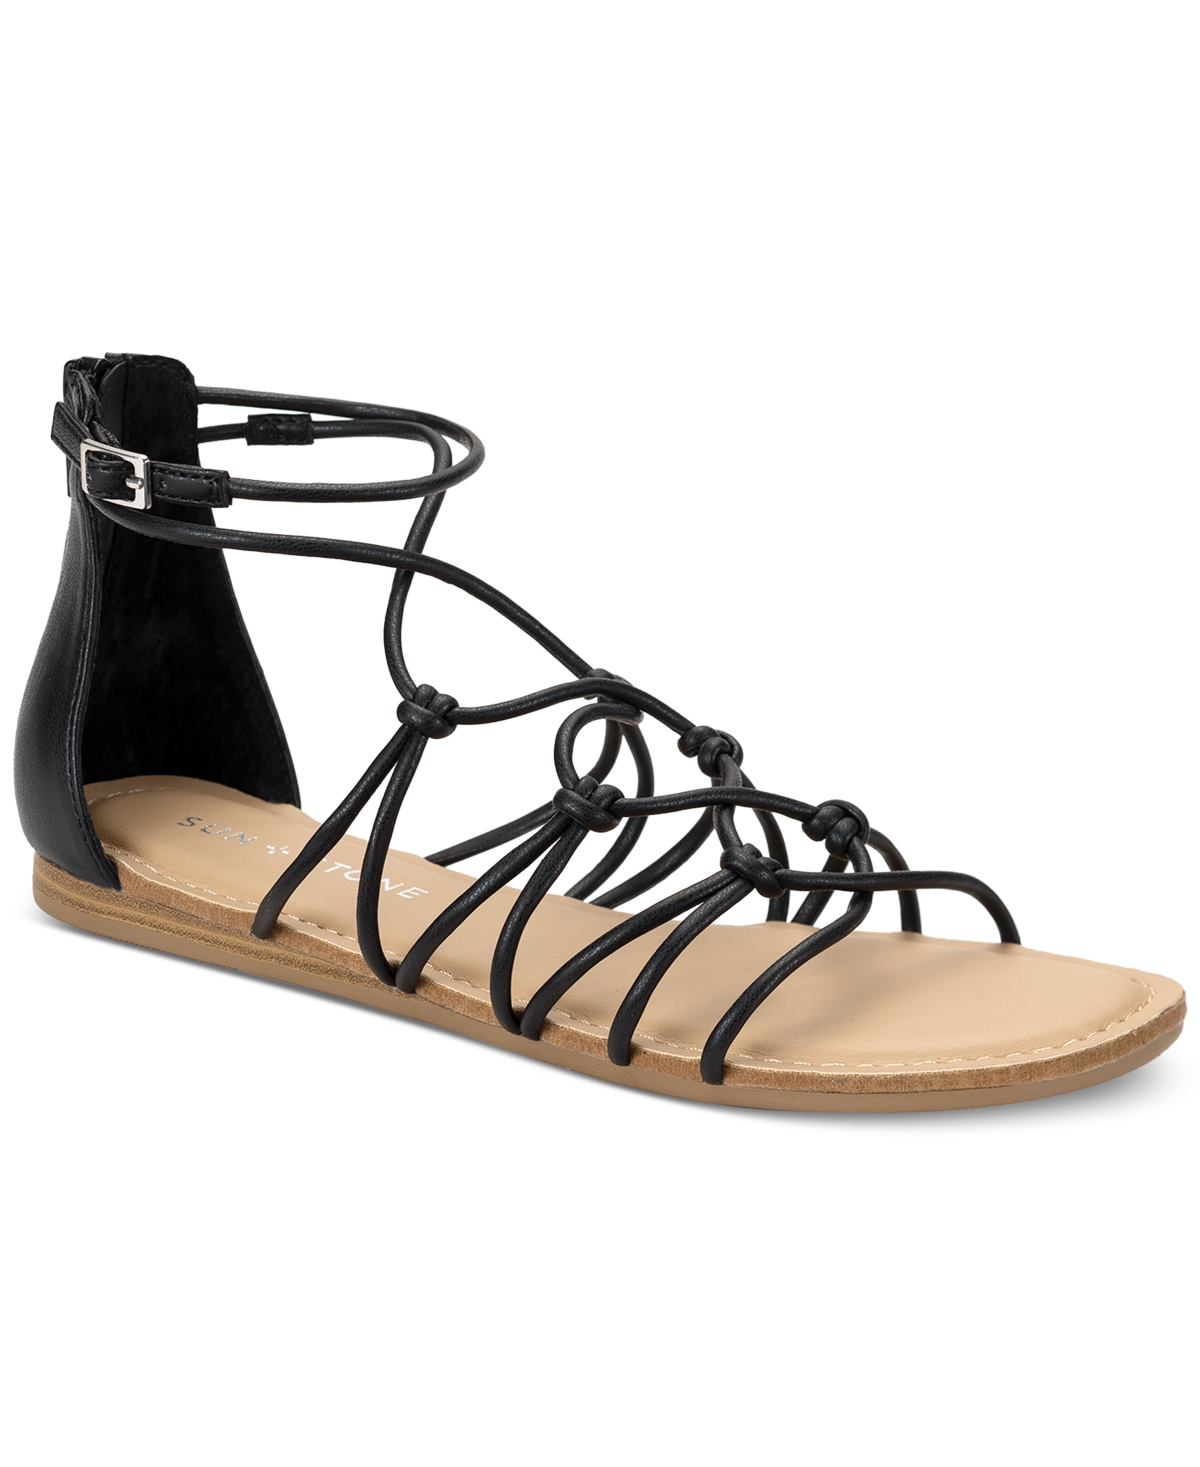 Okenaa Strappy Gladiator Sandals, Created for Macy's - Brandy